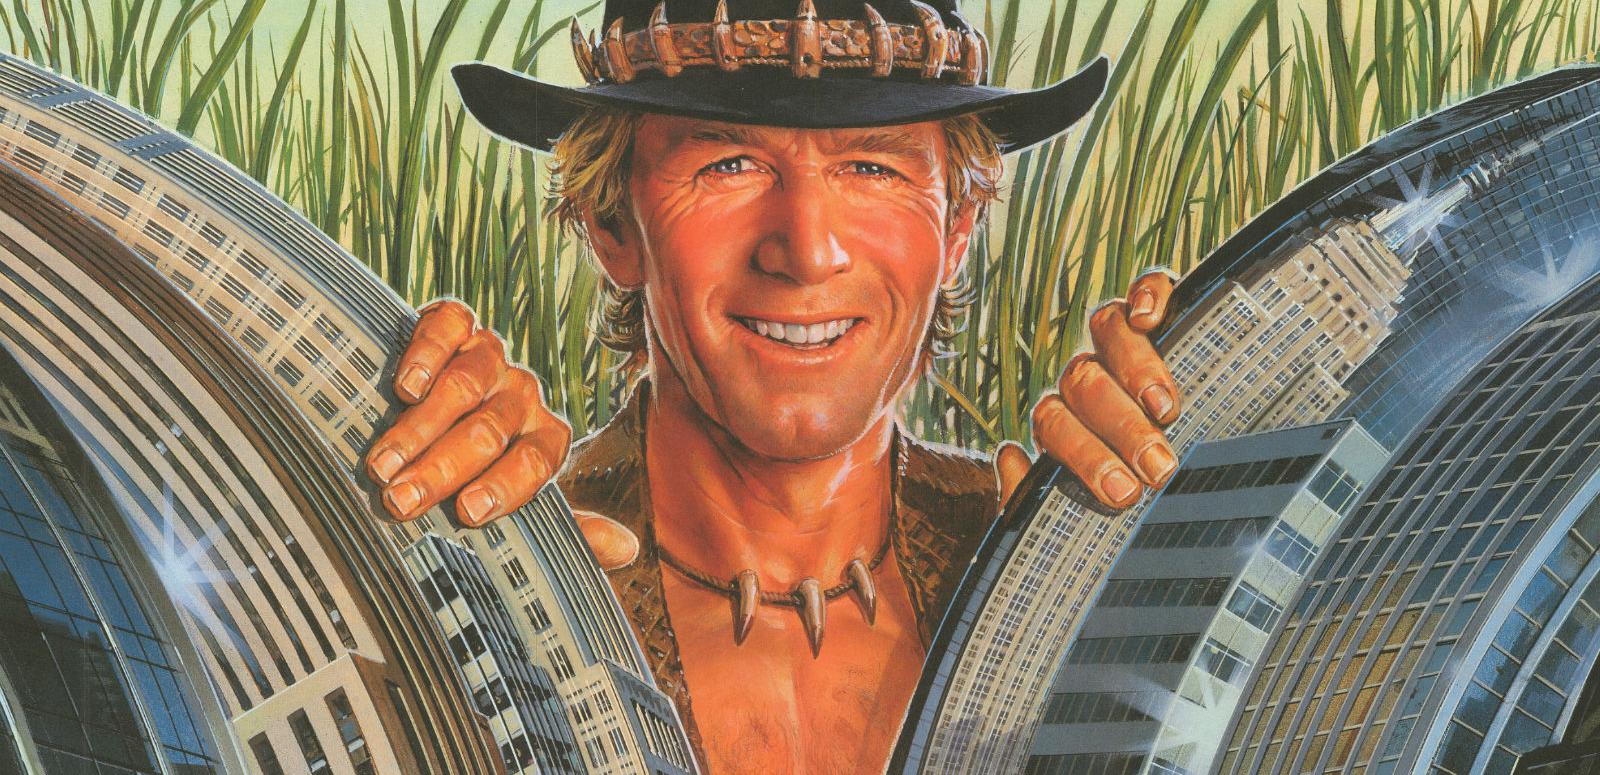 Cropped section of poster from Crocodile Dundee showing Paul Hogan smiling